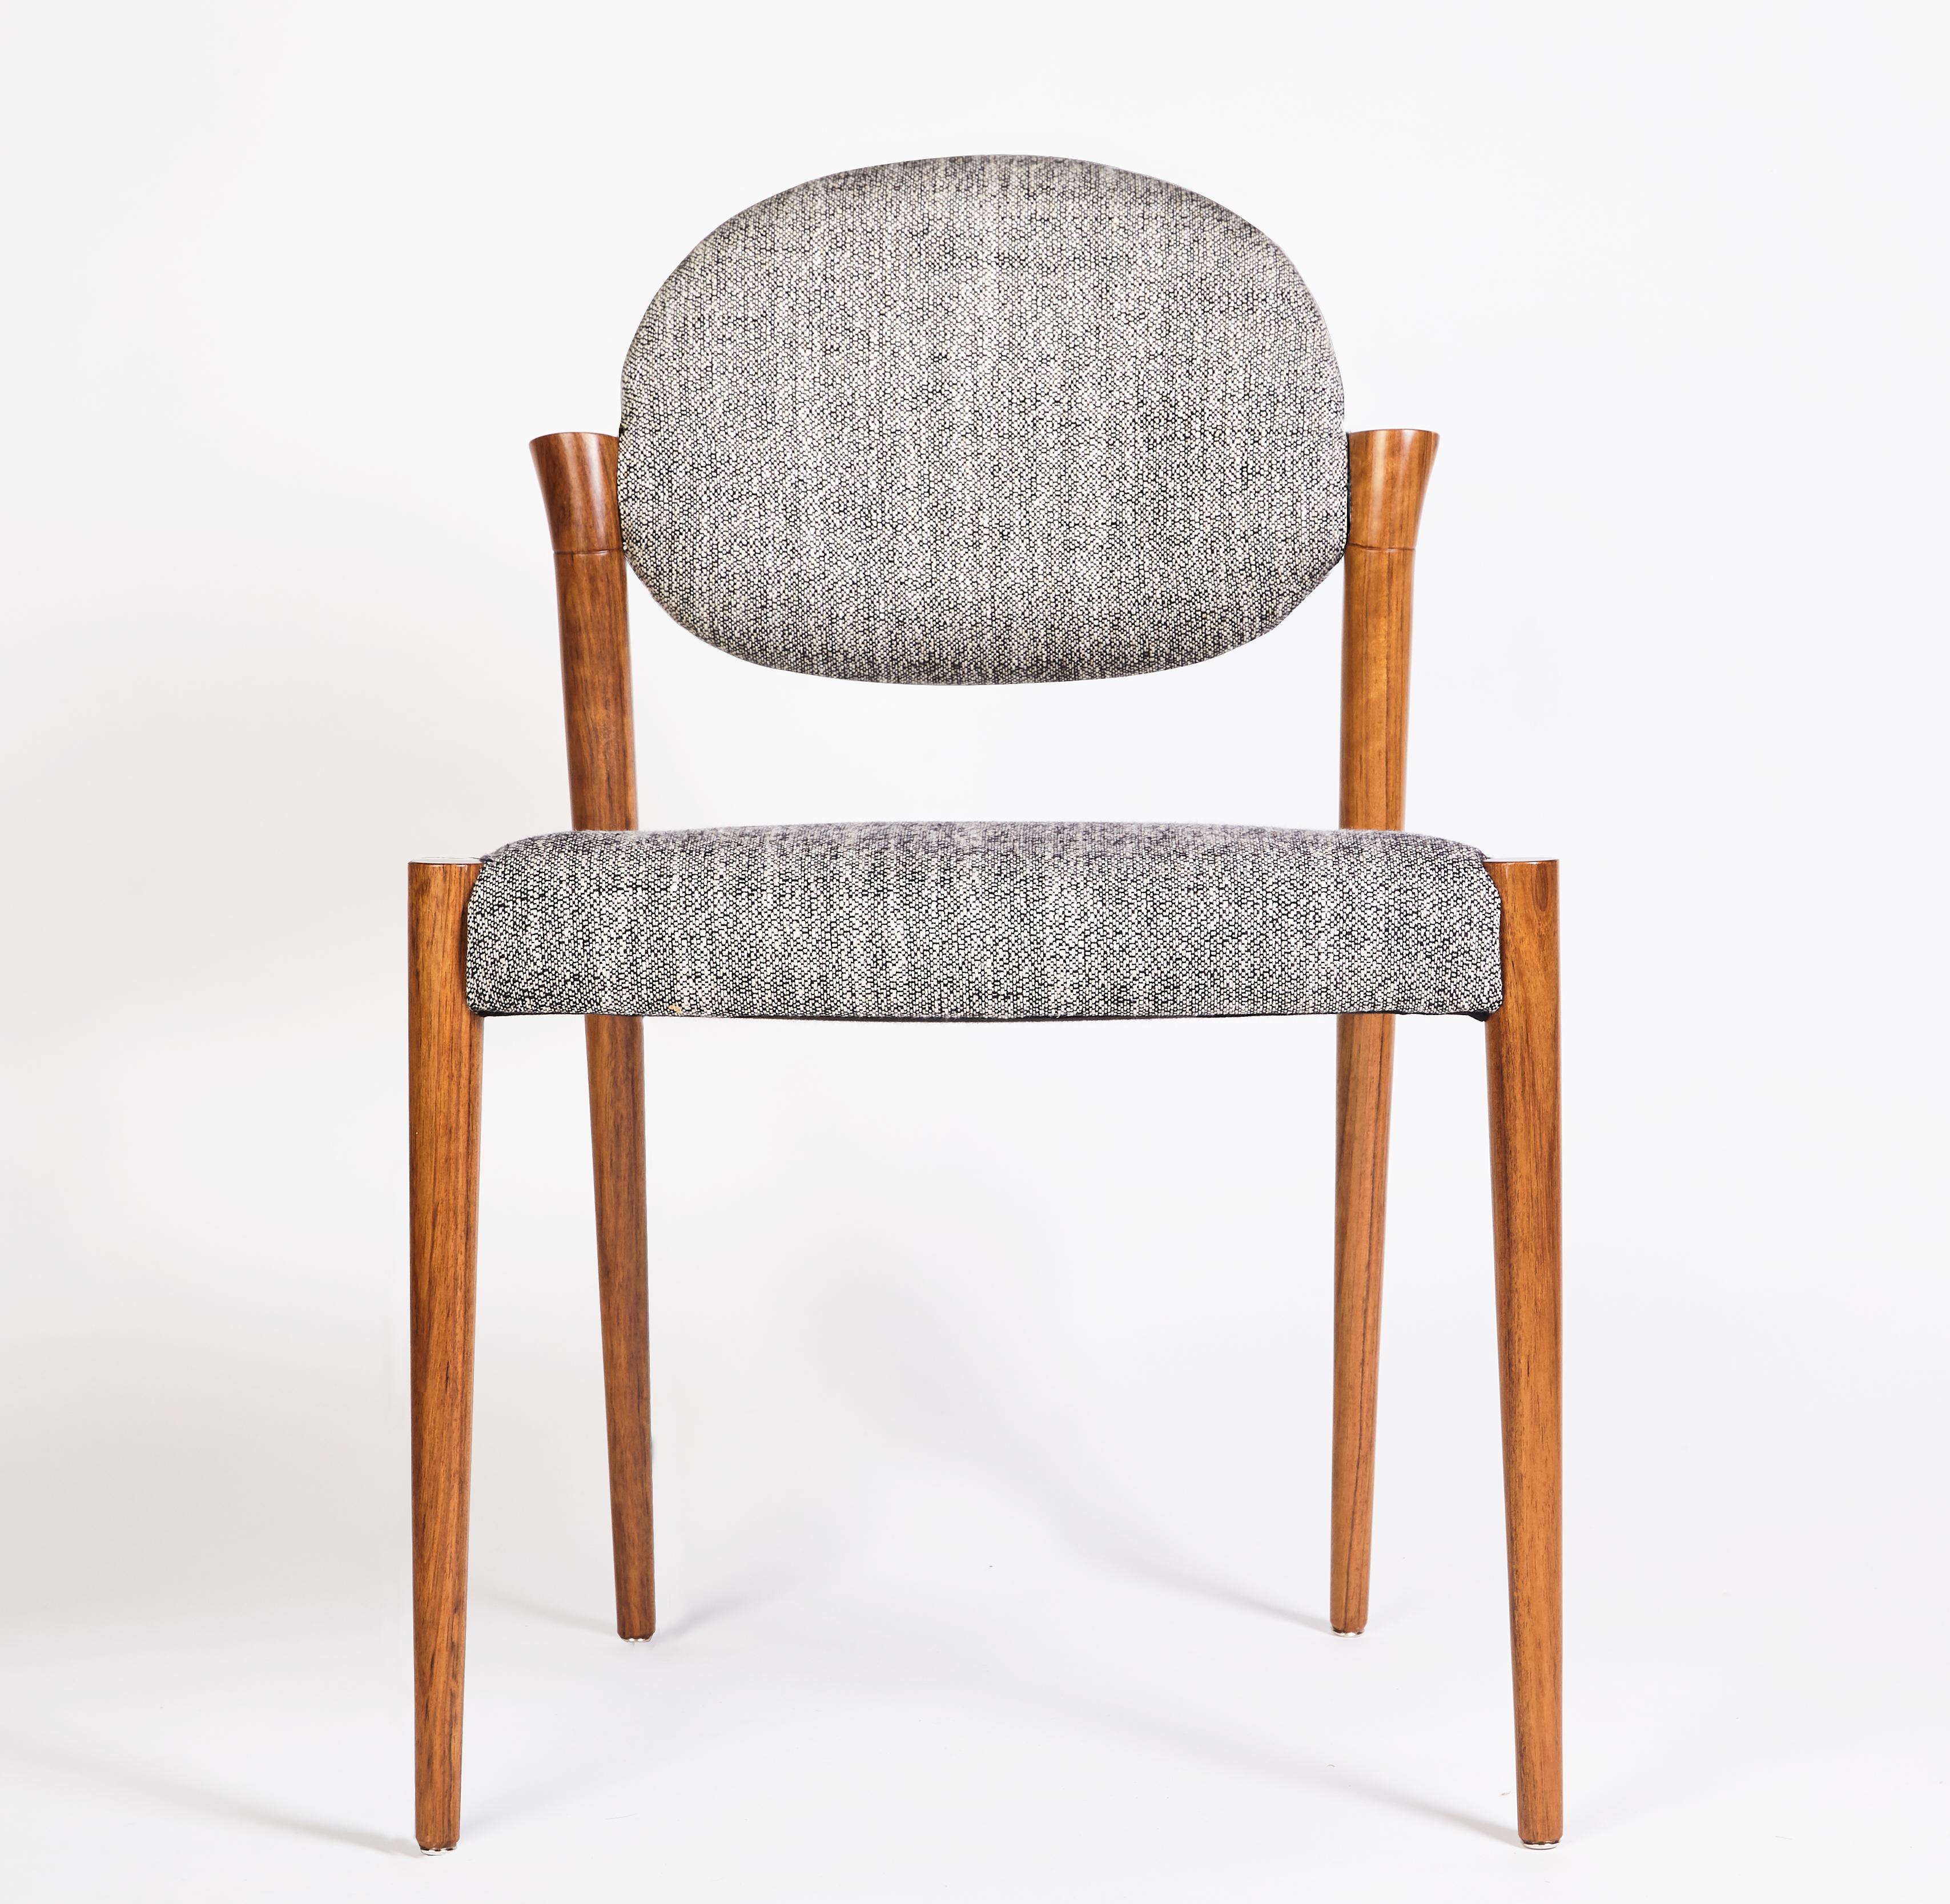 Small Tanoco Chair by DUISTT 
Dimensions: W 55 x D 58 x H 84 cm
Materials: Duistt Fabric Sumak NA1, Satin Mutenye Wood

Tanoco Small Chair is inspired by the mid century architecture and interior design, with its long arches this piece creates